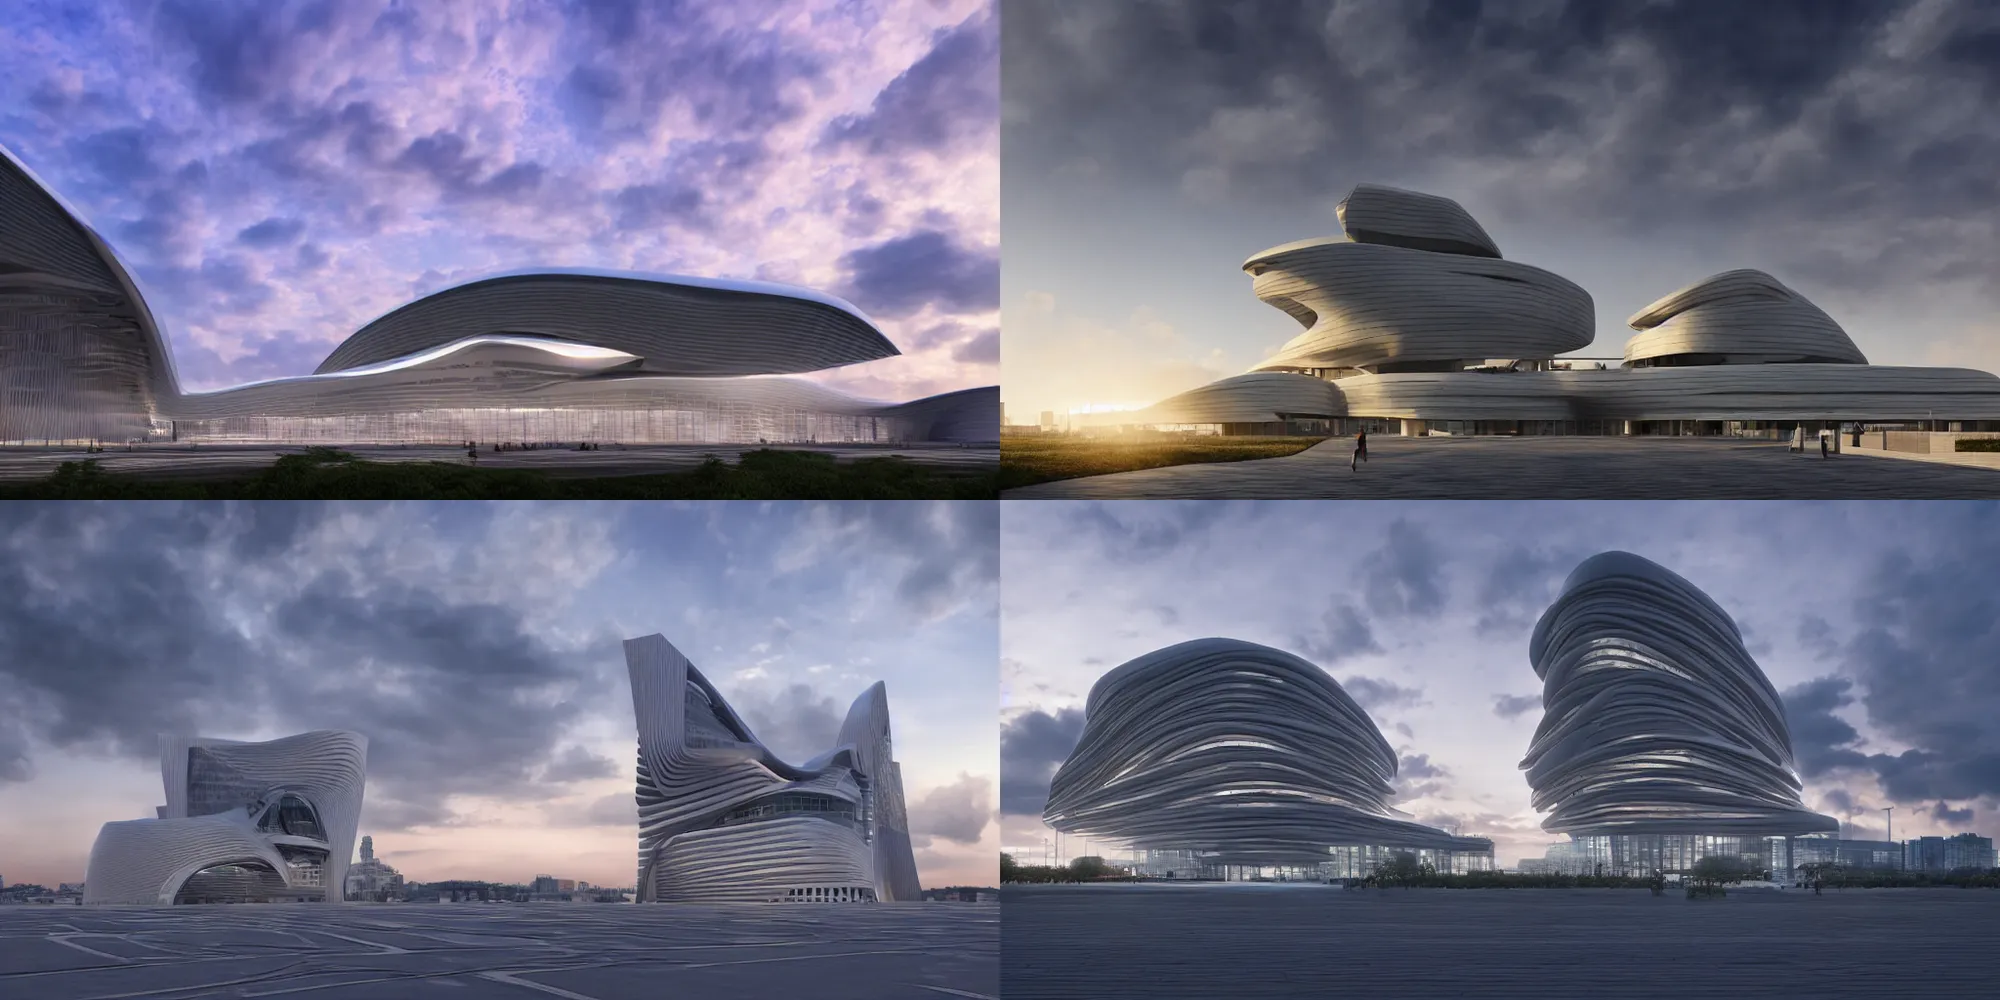 Prompt: photorealistic architectural visualization corona render, building in high-tec style by Zaha Hadid, straight lines and correct perspective, on the beatiful cloudy sky sunset background